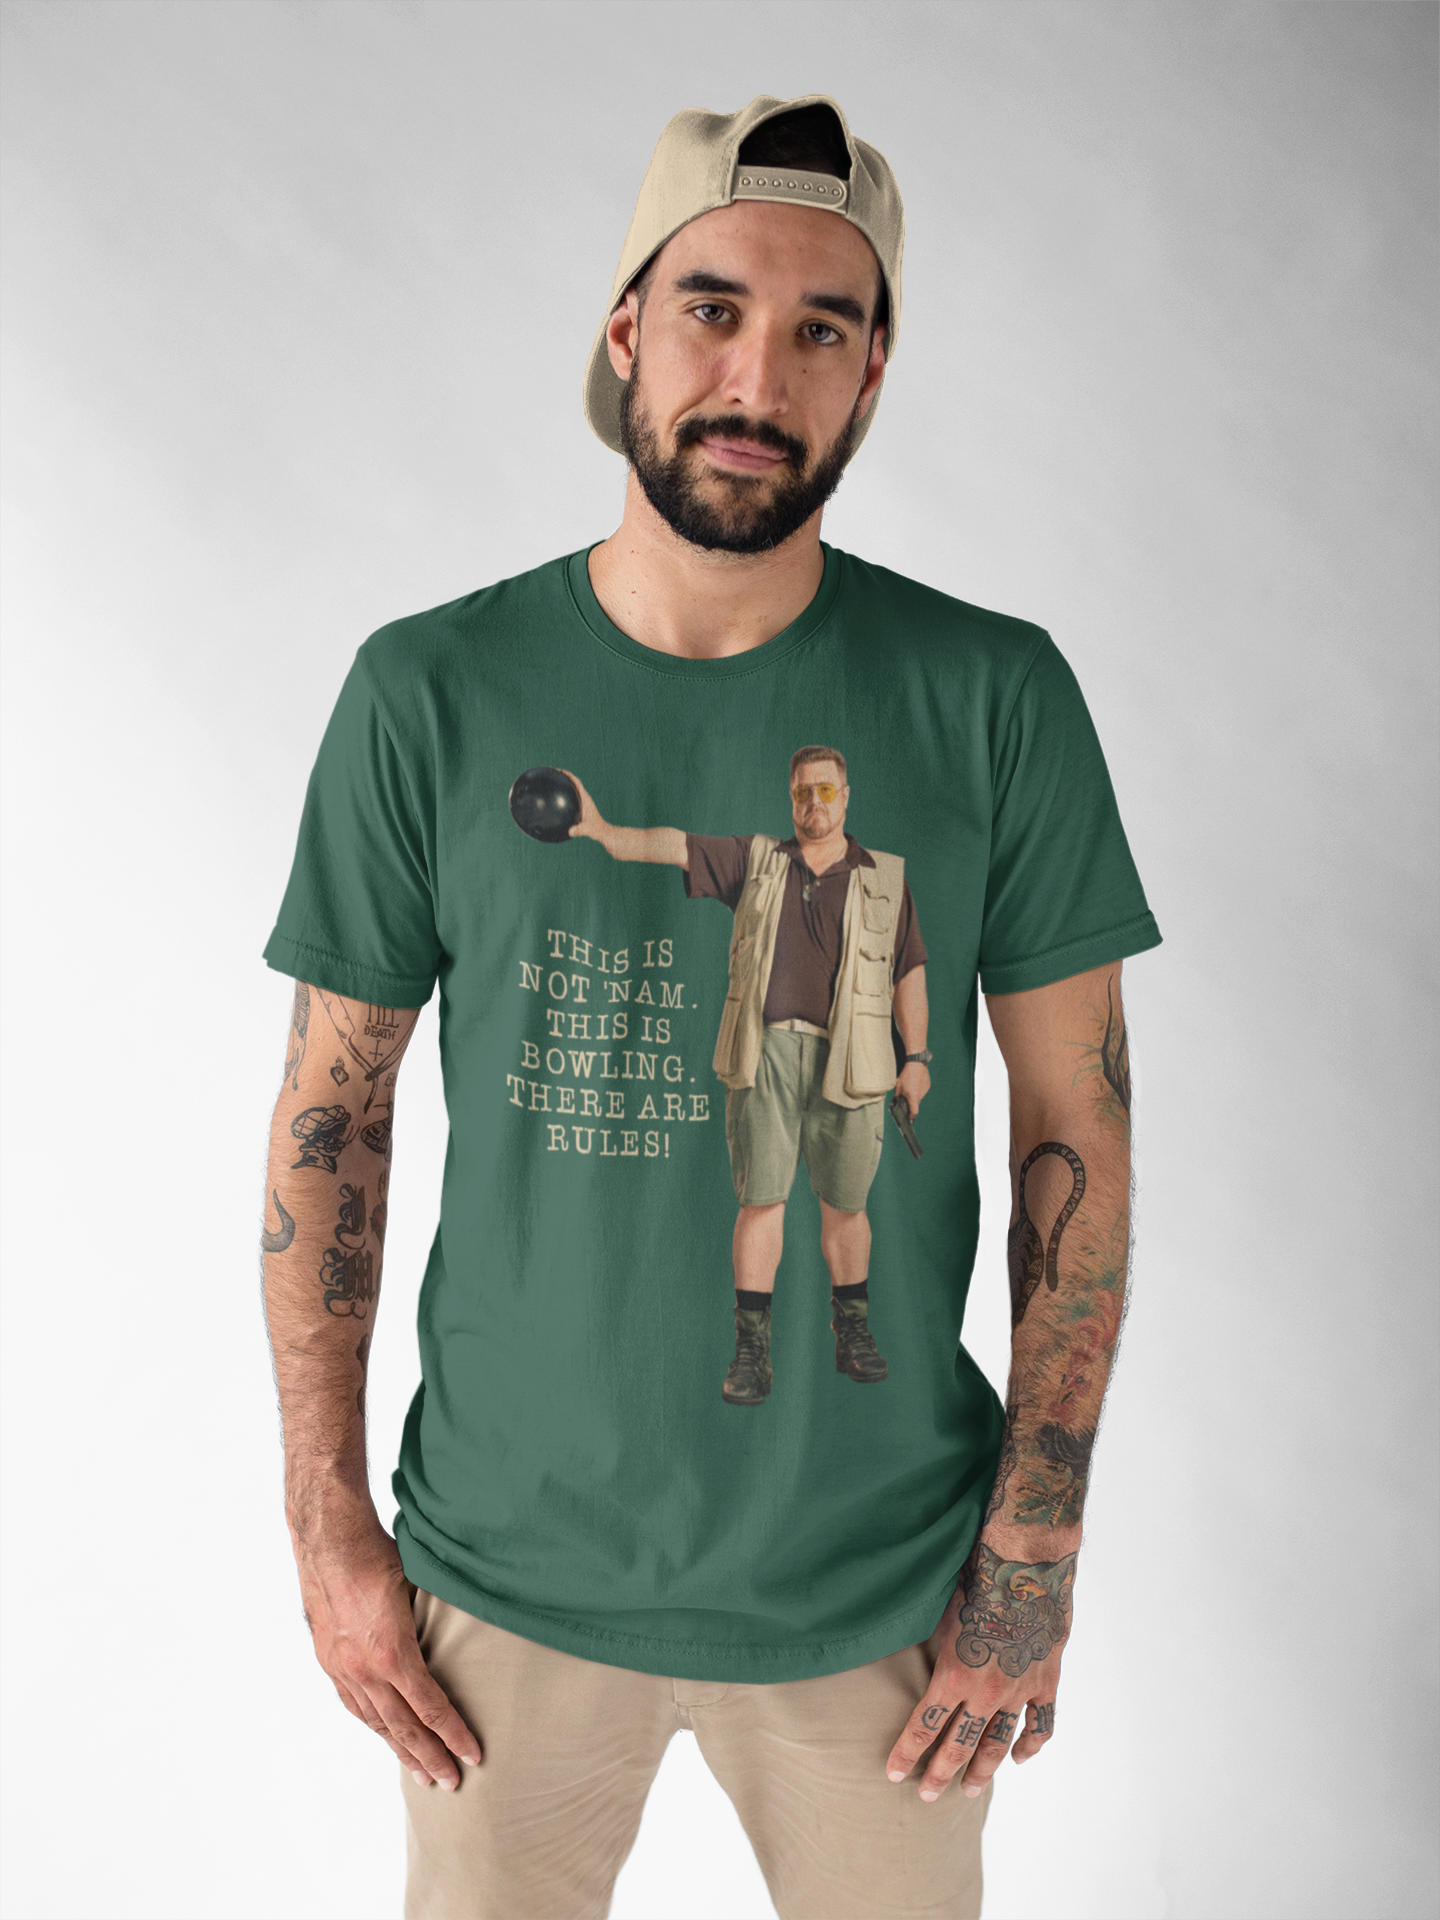 The Big Lebowski T Shirt, This Is Not Nam This Is Bowling There Are Rules Tshirt, Walter Sobchak T Shirt